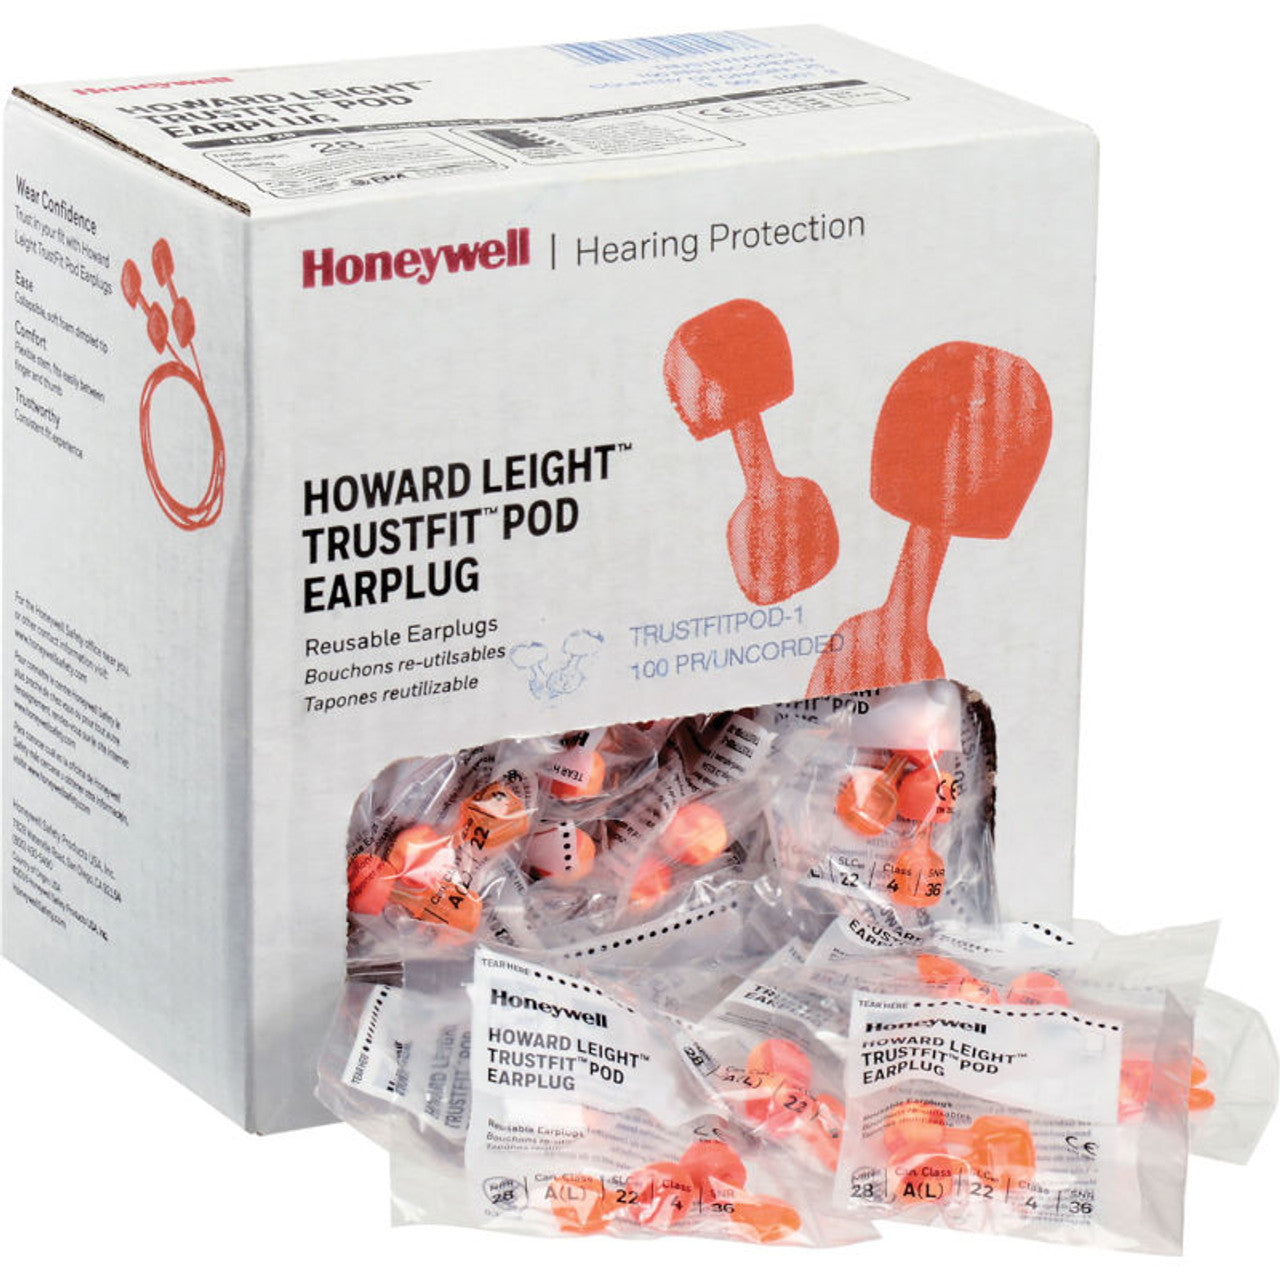 Howard Leight™ TrustFit™ Ear Pod, NRR 28, Corded, 100 Pairs/Box 10 Box/Case